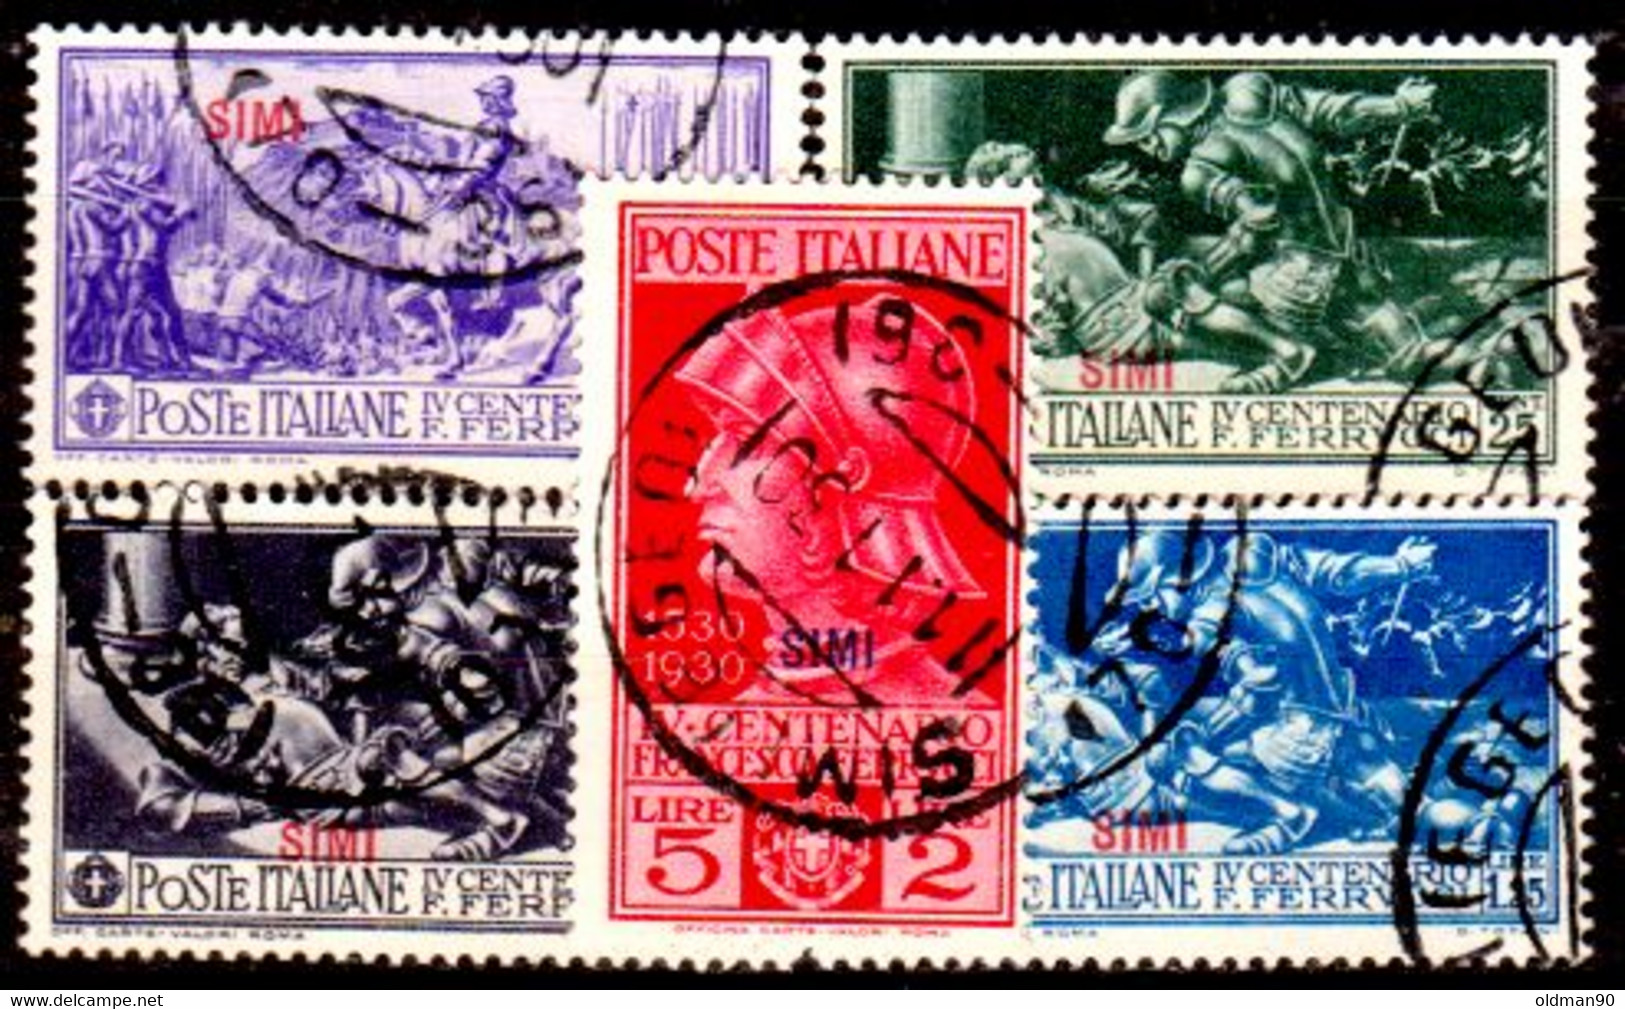 Egeo-OS-353- Simi: Original Stamps And Overprint 1930 (o) Used - Quality In Your Opinion. - Egeo (Simi)